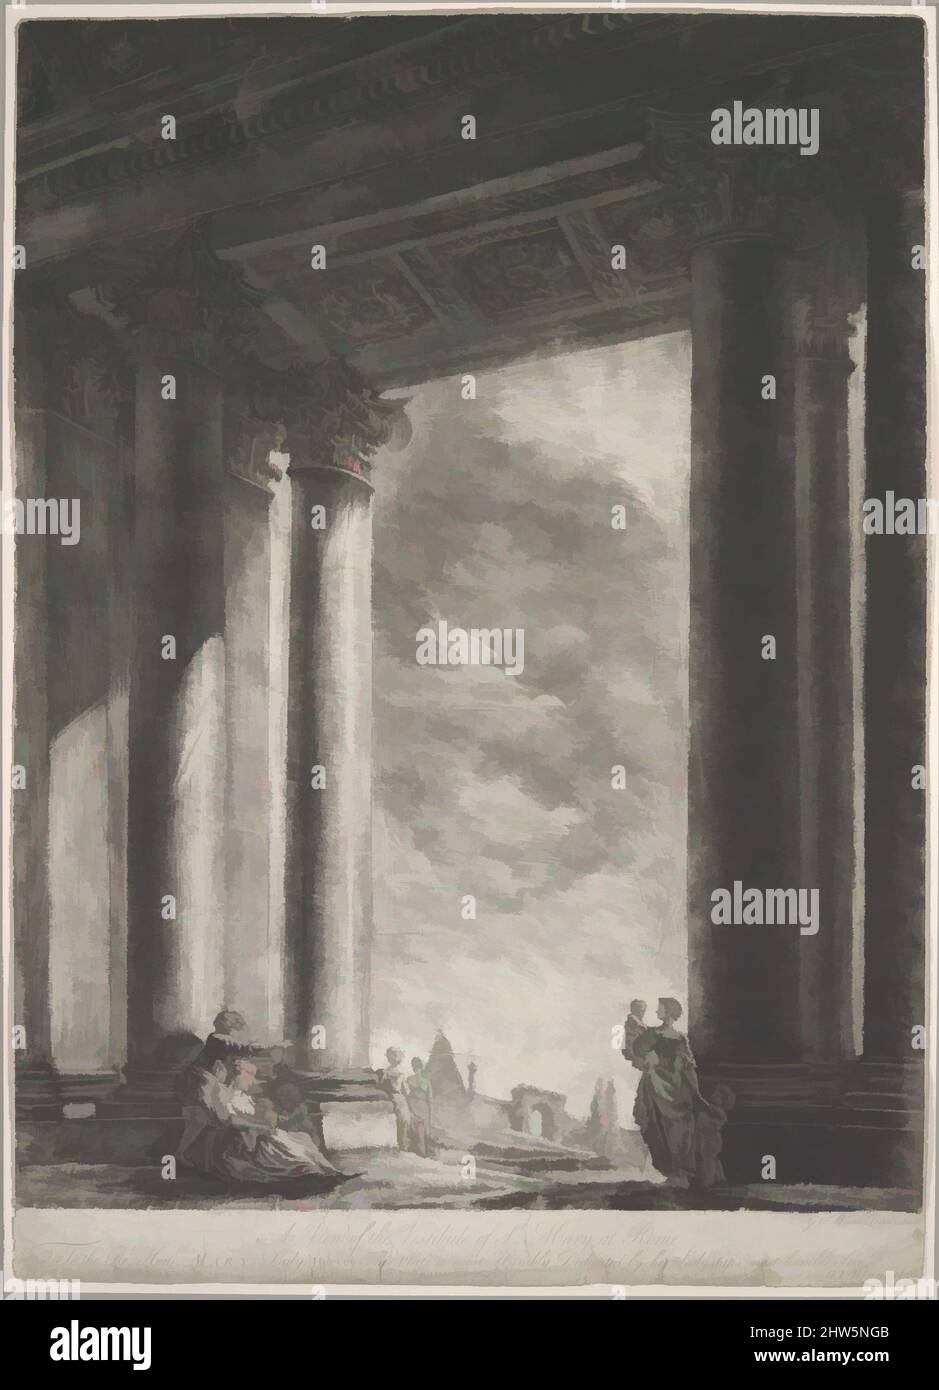 Art inspired by A View of the Vestibule of Santa Maria Maggiore at Rome, 1765–67, Mezzotint, Sheet: 22 1/4 x 16 in. (56.5 x 40.6 cm), Georges-François Blondel was the son of a leading French architectural theorist Jacques-François Blondel. After training in Paris, he worked first in, Classic works modernized by Artotop with a splash of modernity. Shapes, color and value, eye-catching visual impact on art. Emotions through freedom of artworks in a contemporary way. A timeless message pursuing a wildly creative new direction. Artists turning to the digital medium and creating the Artotop NFT Stock Photo